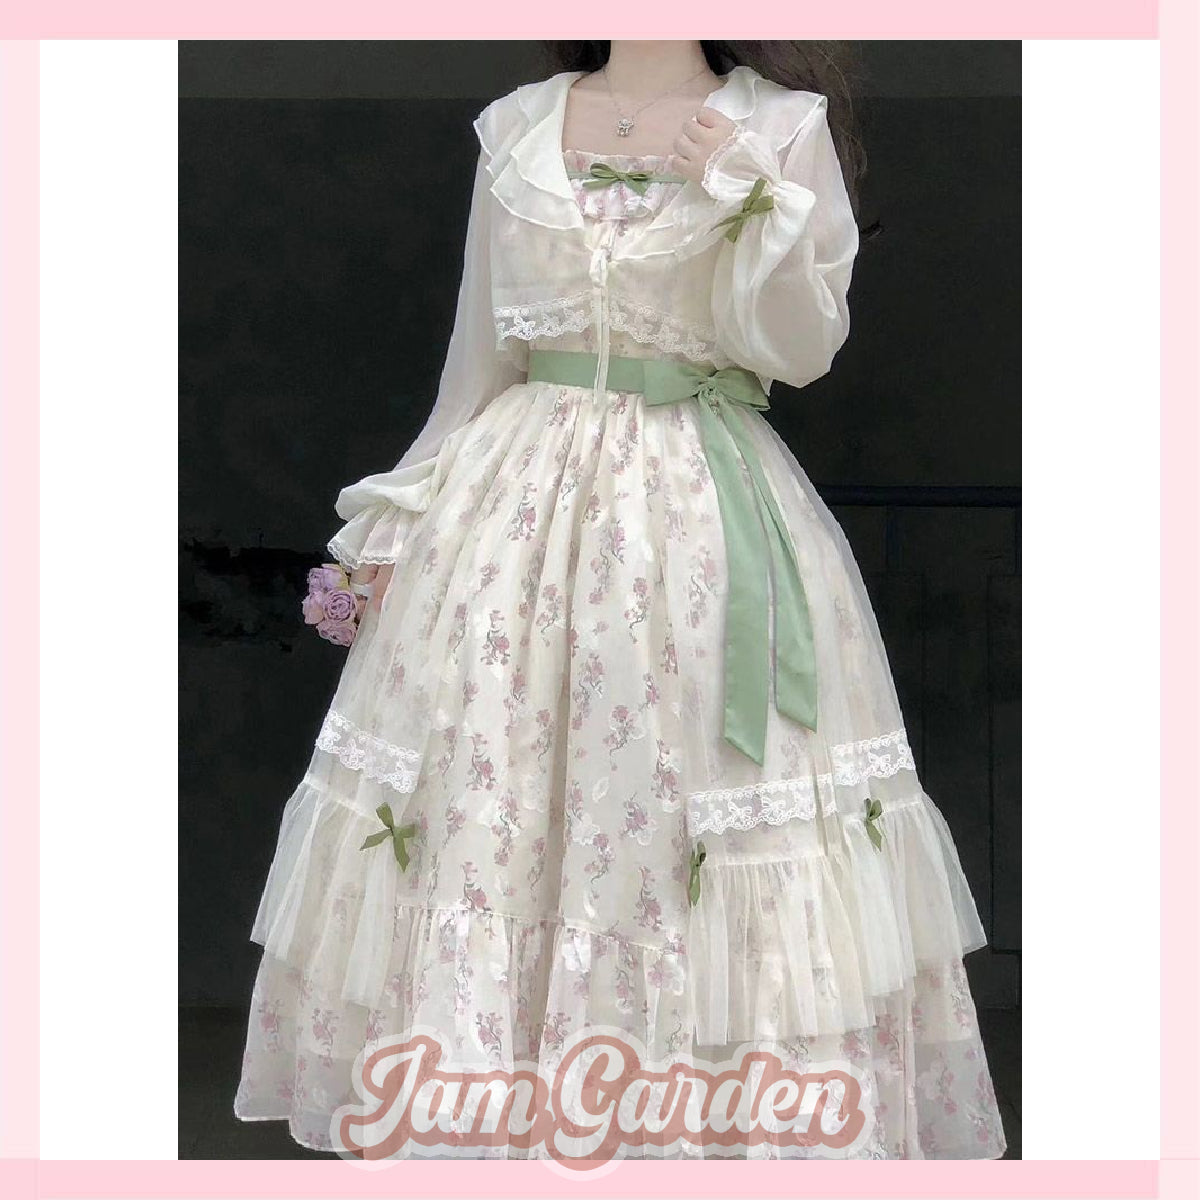 French gentle and sweet forest style pastoral style dress